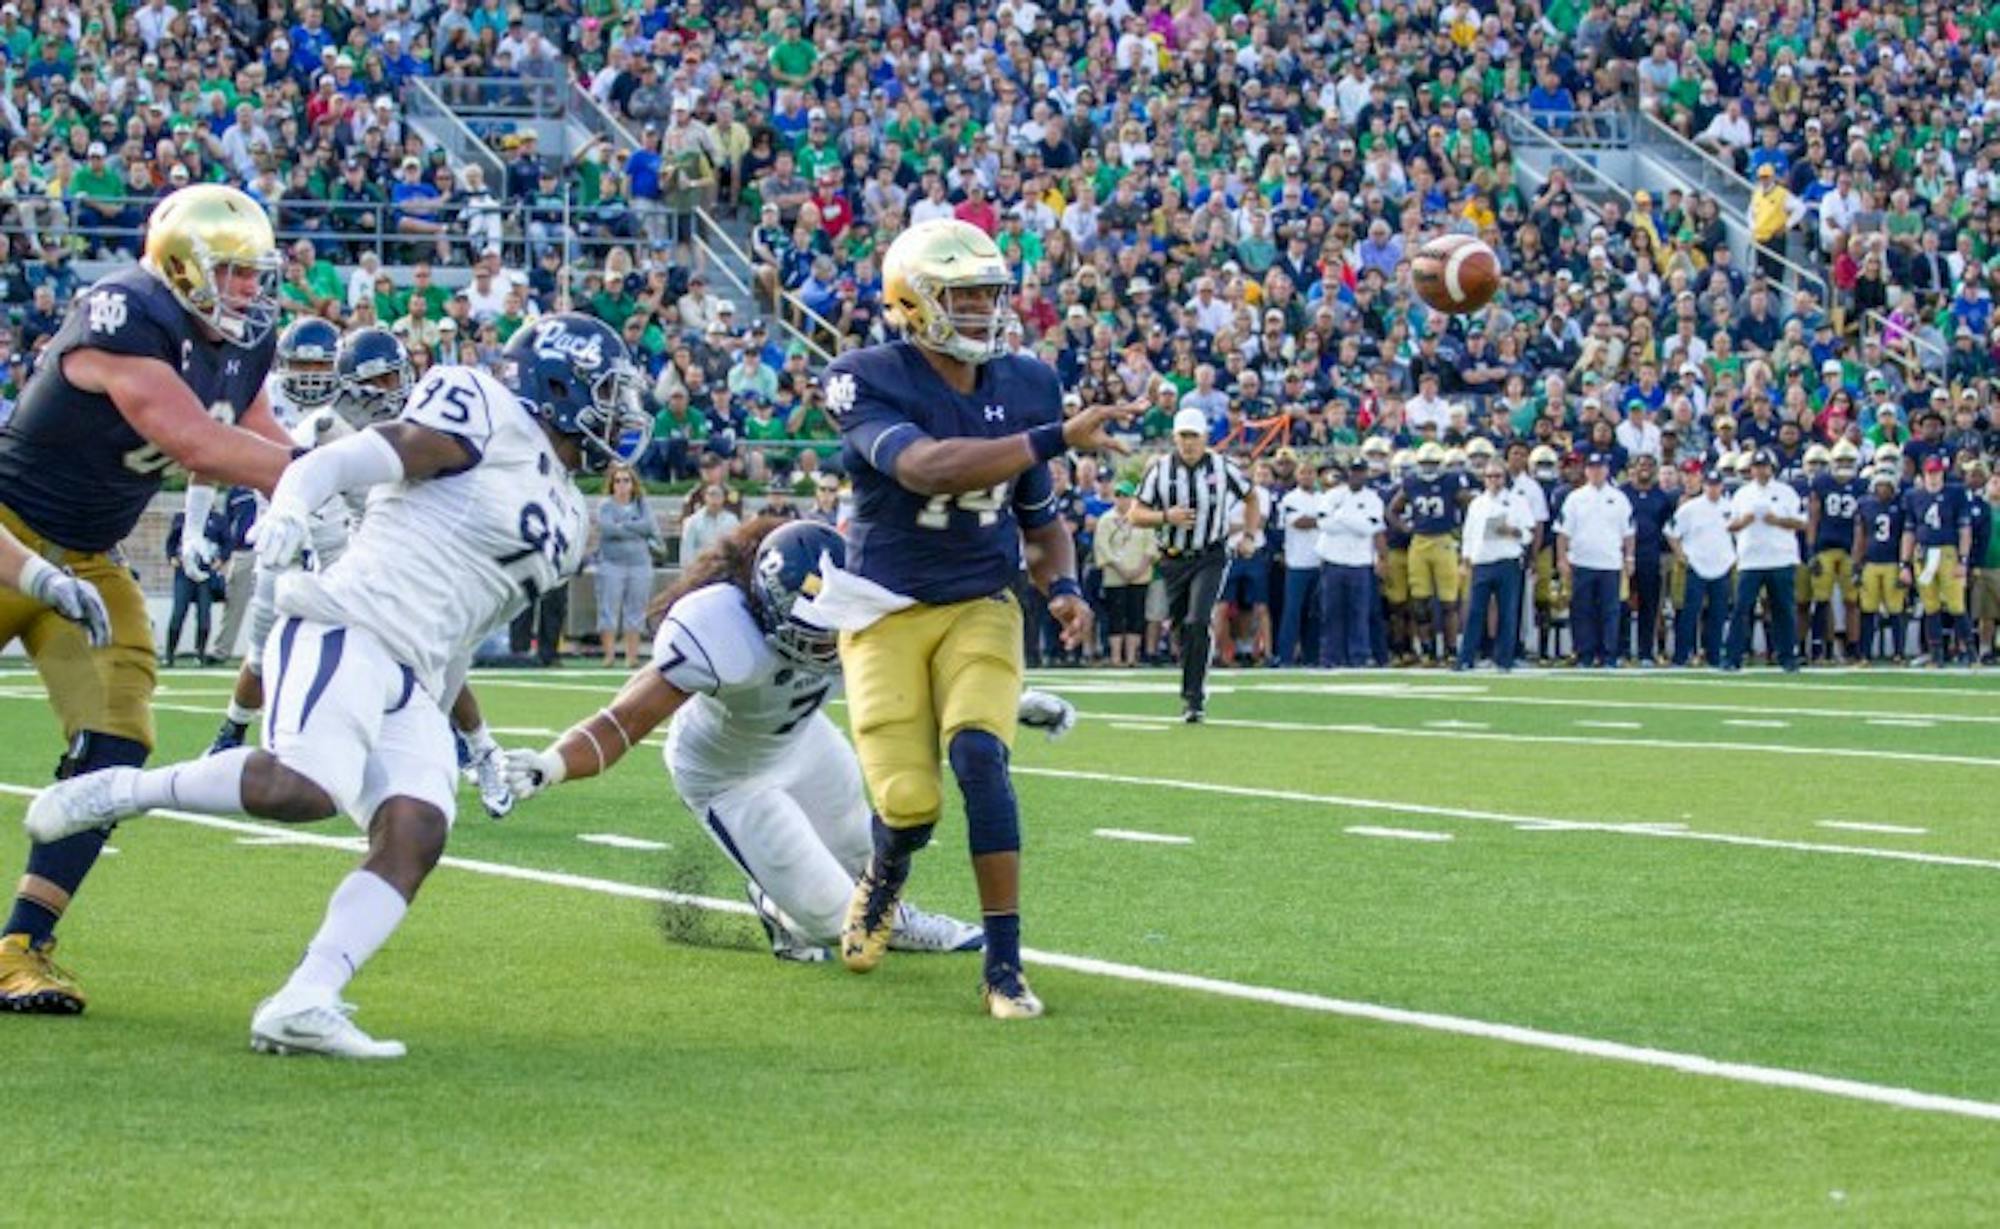 Junior quarterback DeShone Kizer pitches the ball to senior running back Tarean Folston for a touchdown during Notre Dame’s 39-10 win over Nevada on Saturday.